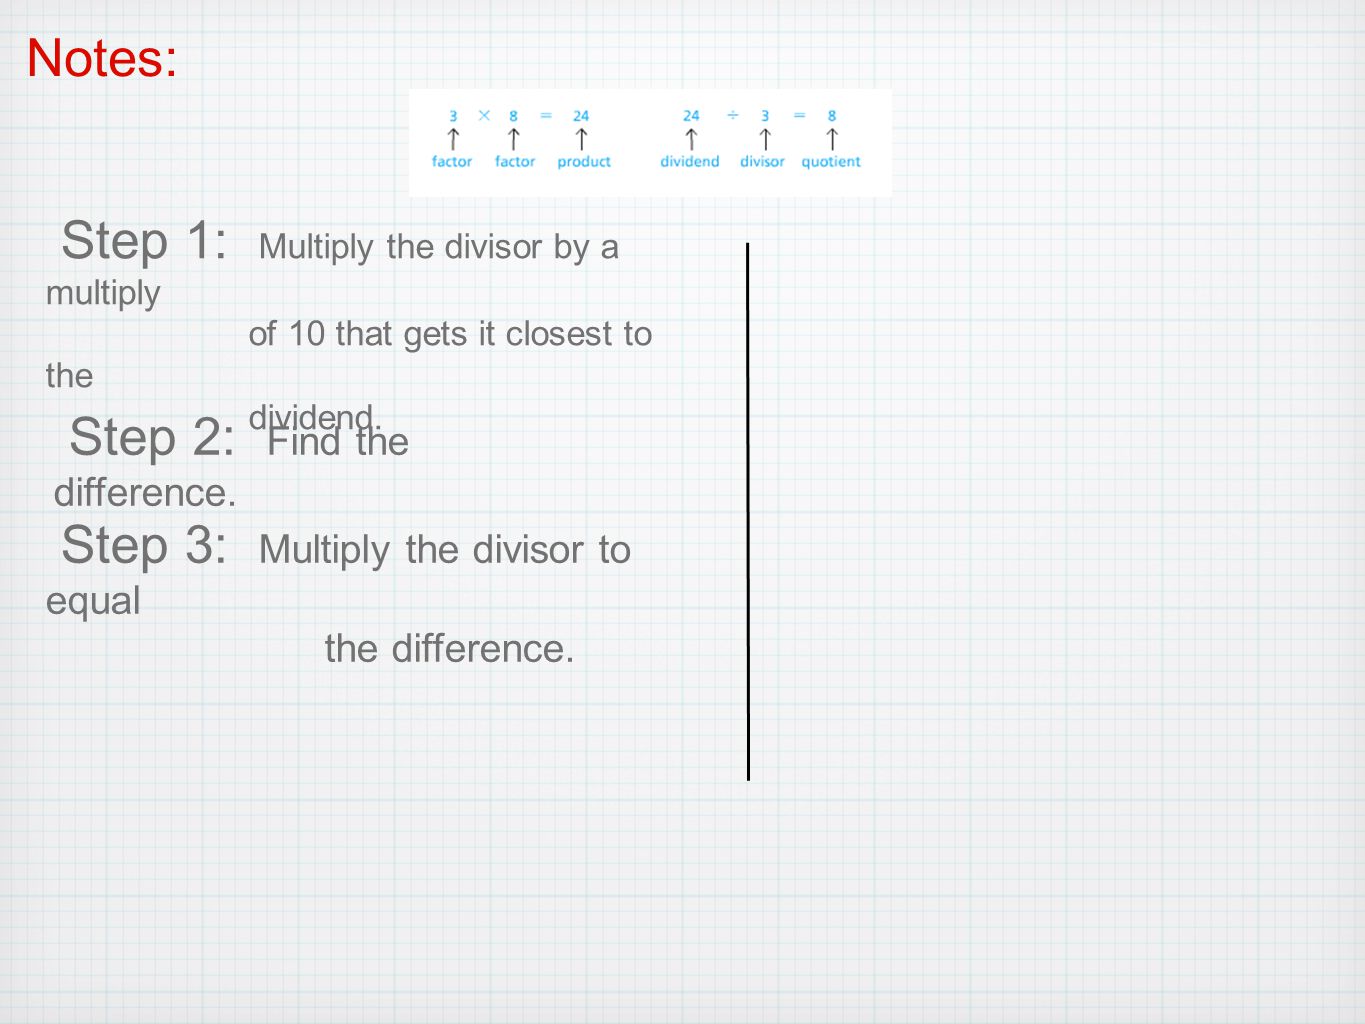 Step 1: Multiply the divisor by a multiply